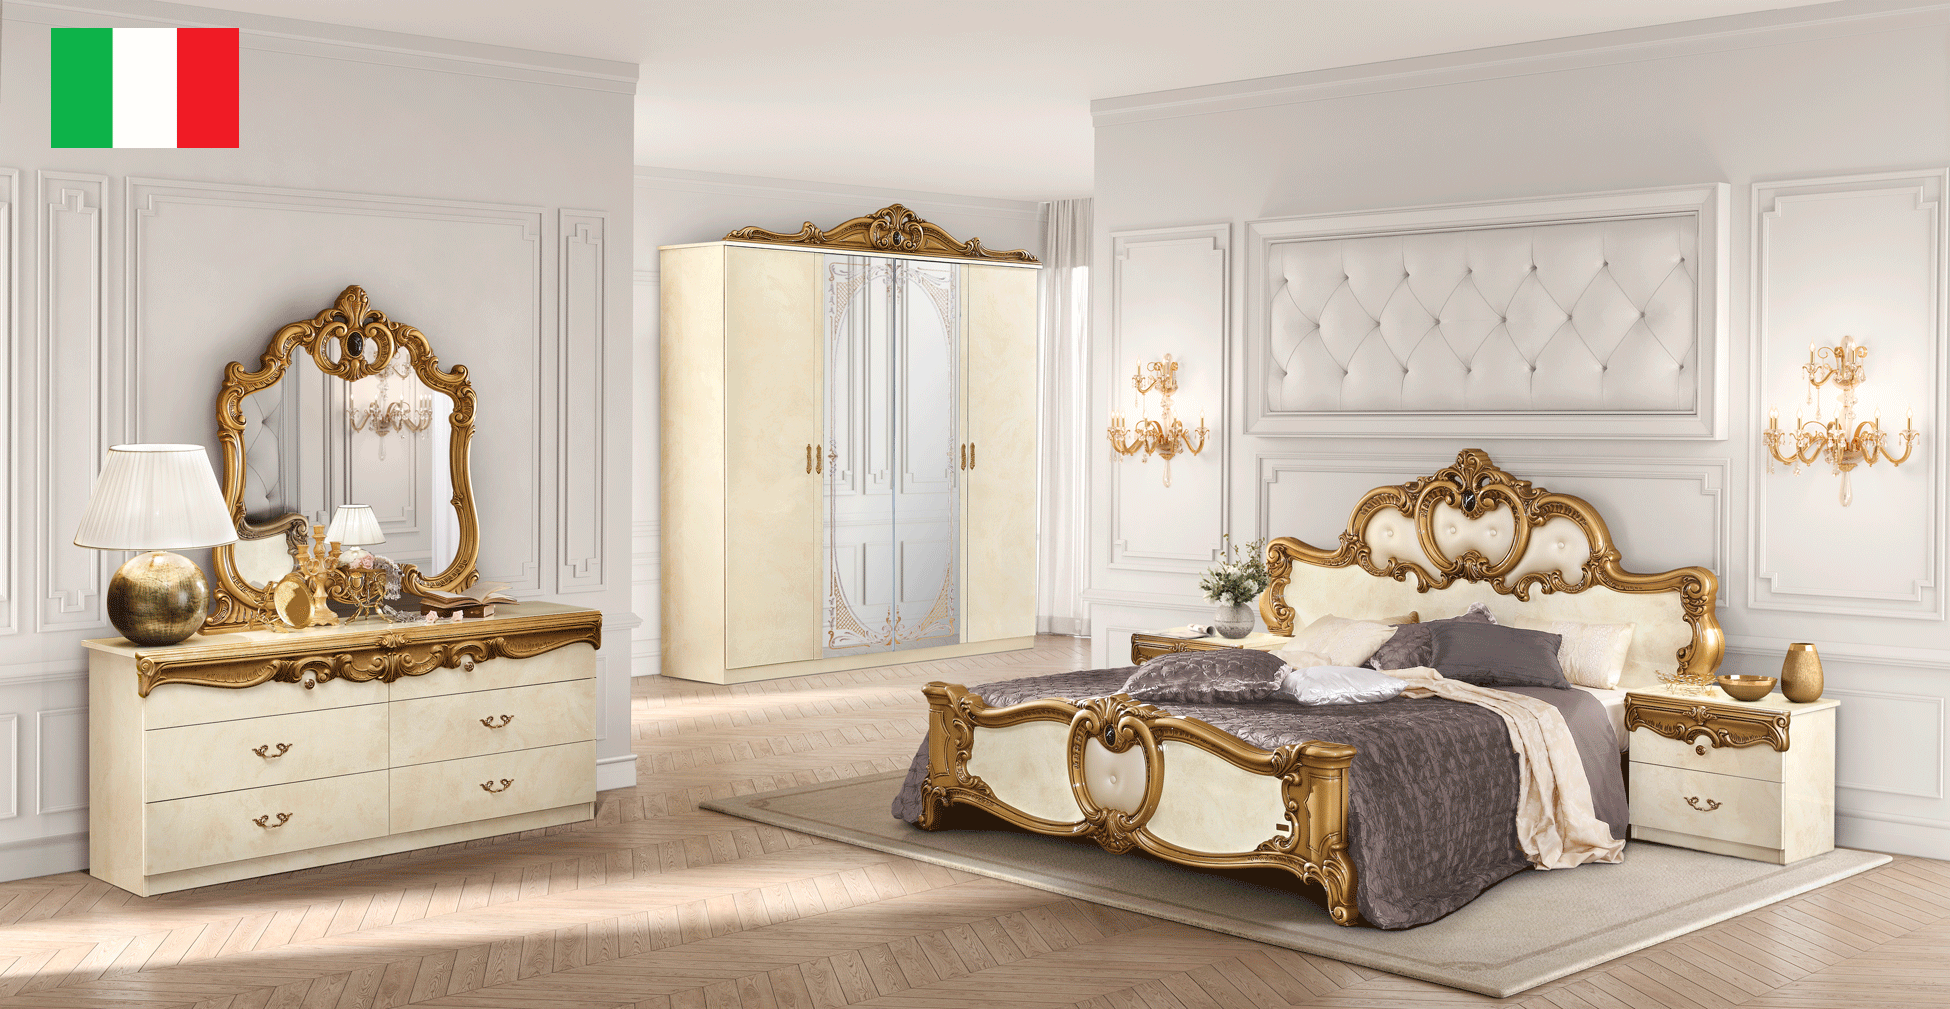 Bedroom Furniture Dressers and Chests Barocco Ivory w/Gold Bedroom